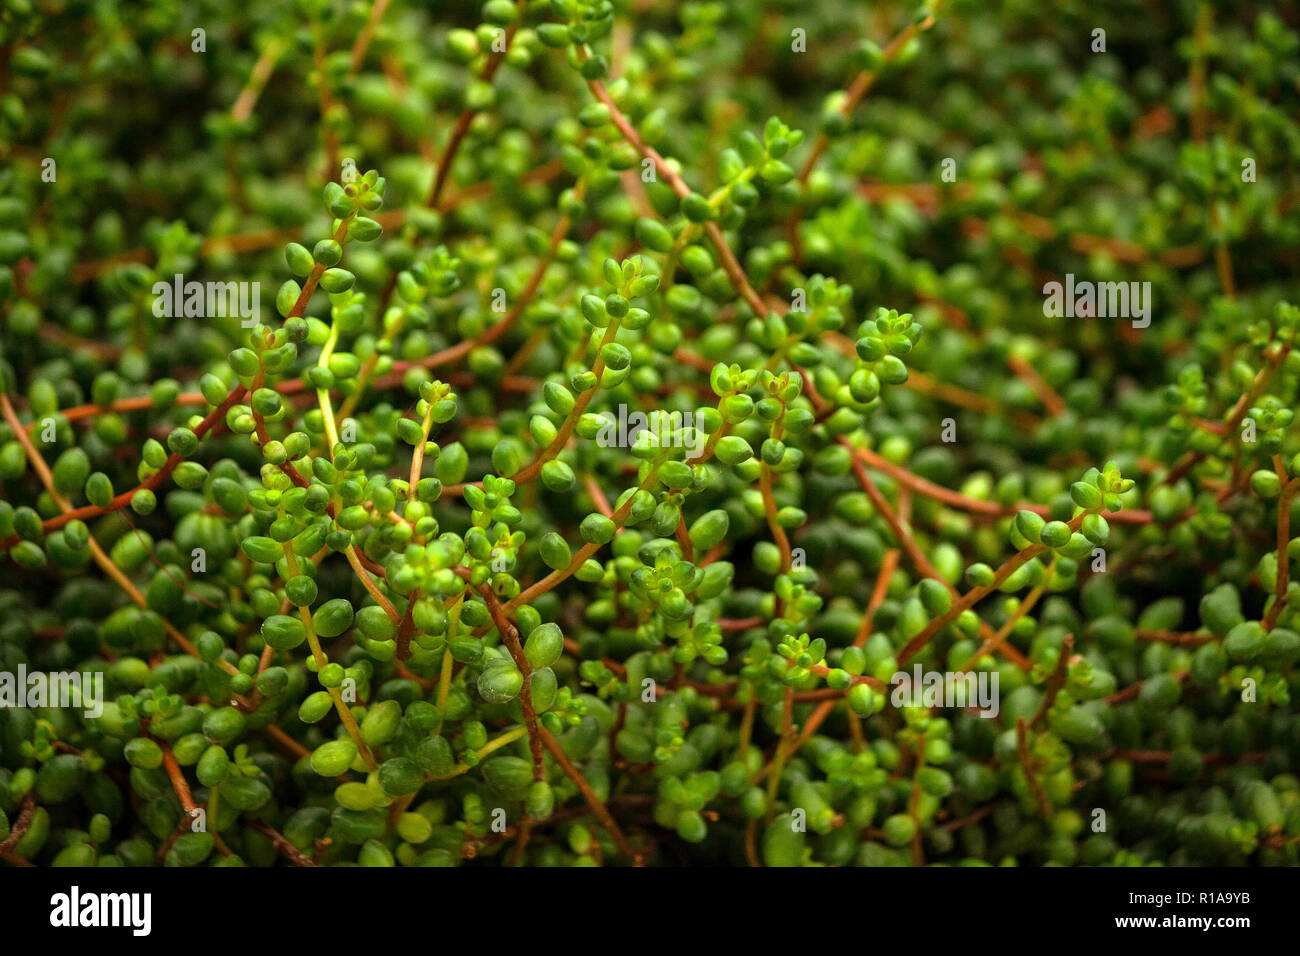 lot of long stems with round leaves along the entire length, light and dark green shades, the plant grows a dense carpet on the ground, foliage, shade Stock Photo